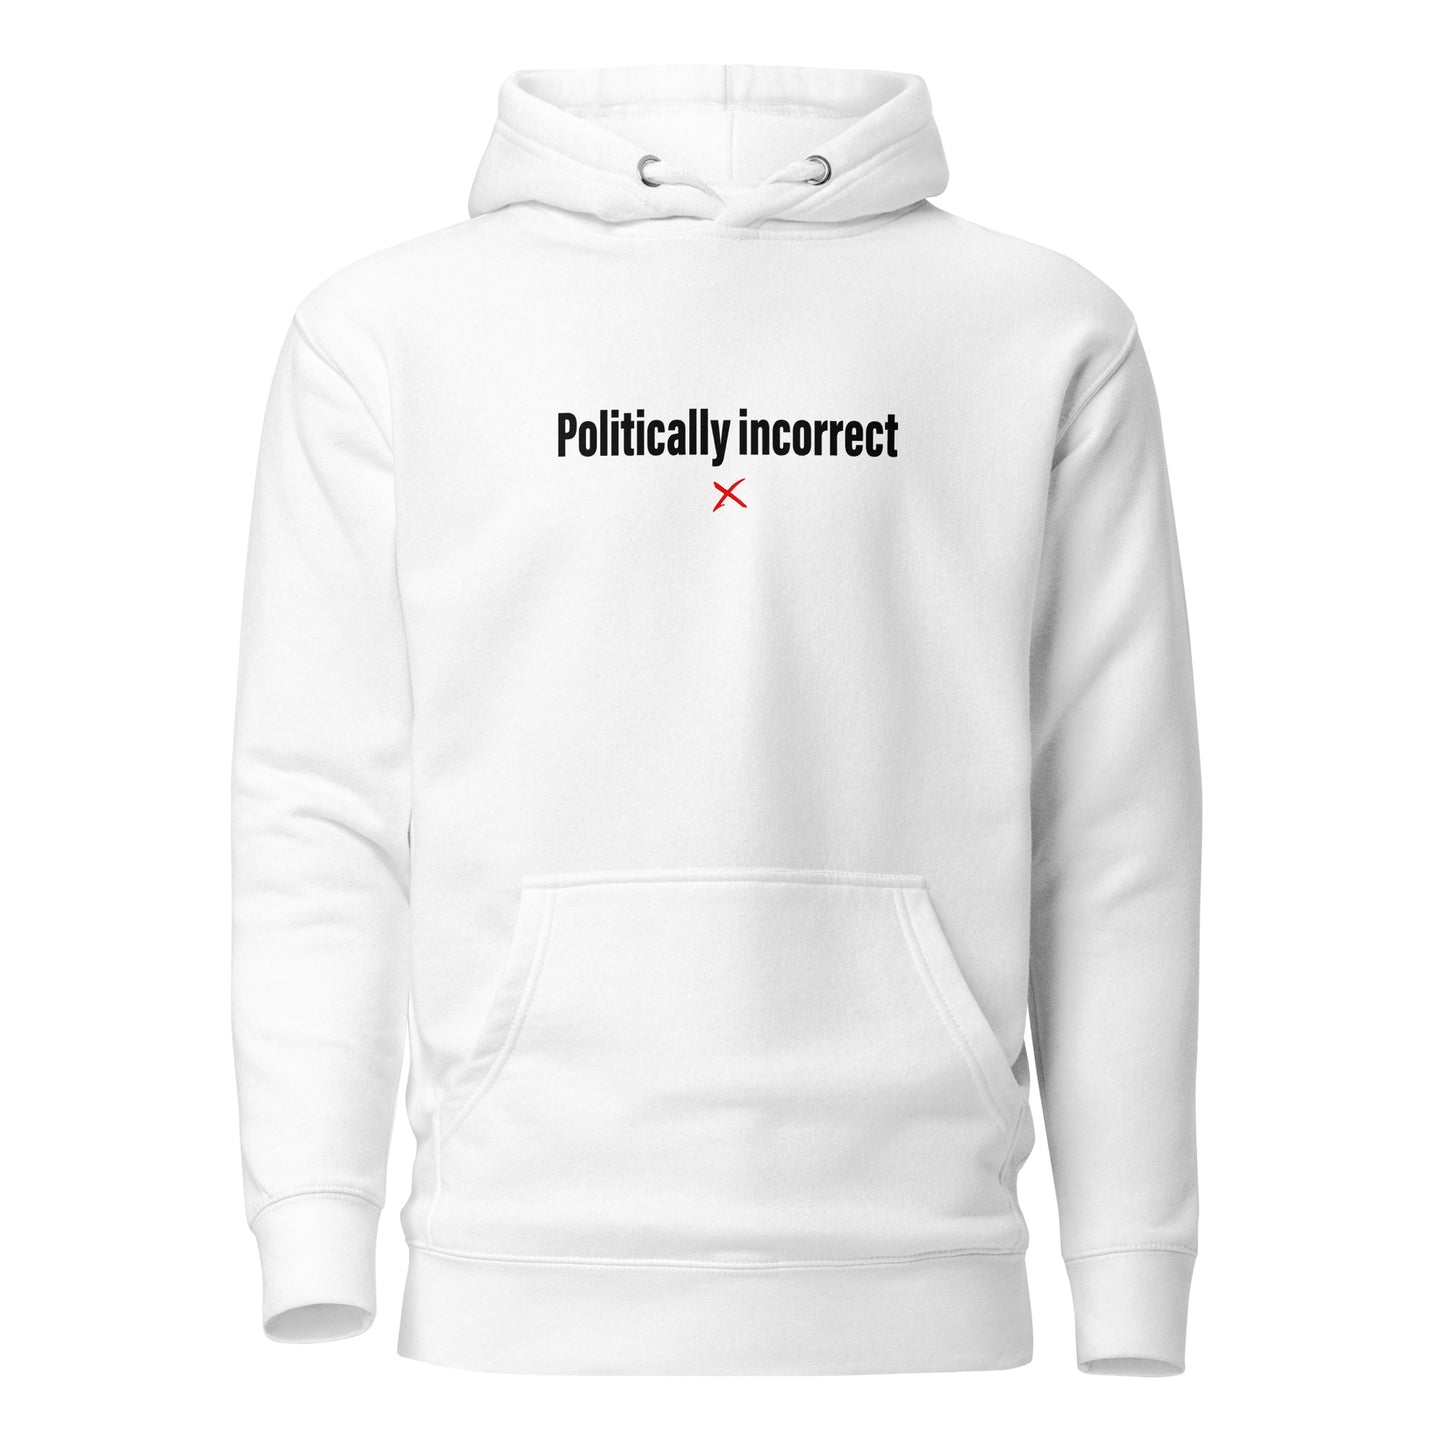 Politically incorrect - Hoodie